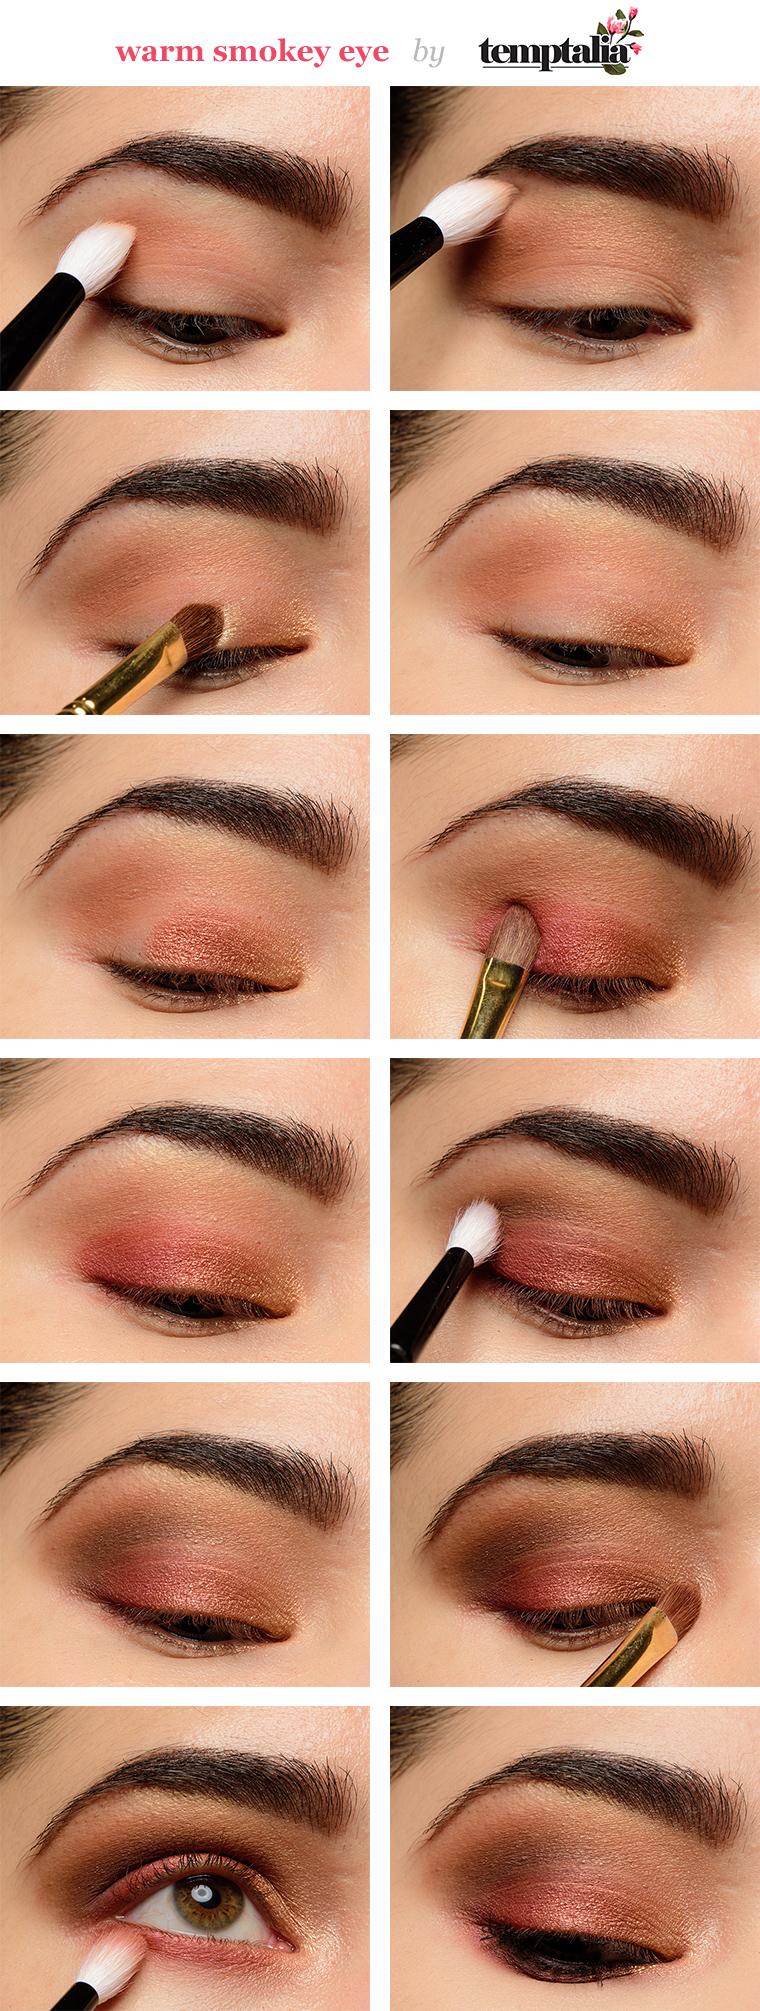 Pictures Of Eye Makeup How To Apply Eyeshadow Smokey Eye Makeup Tutorial For Beginners